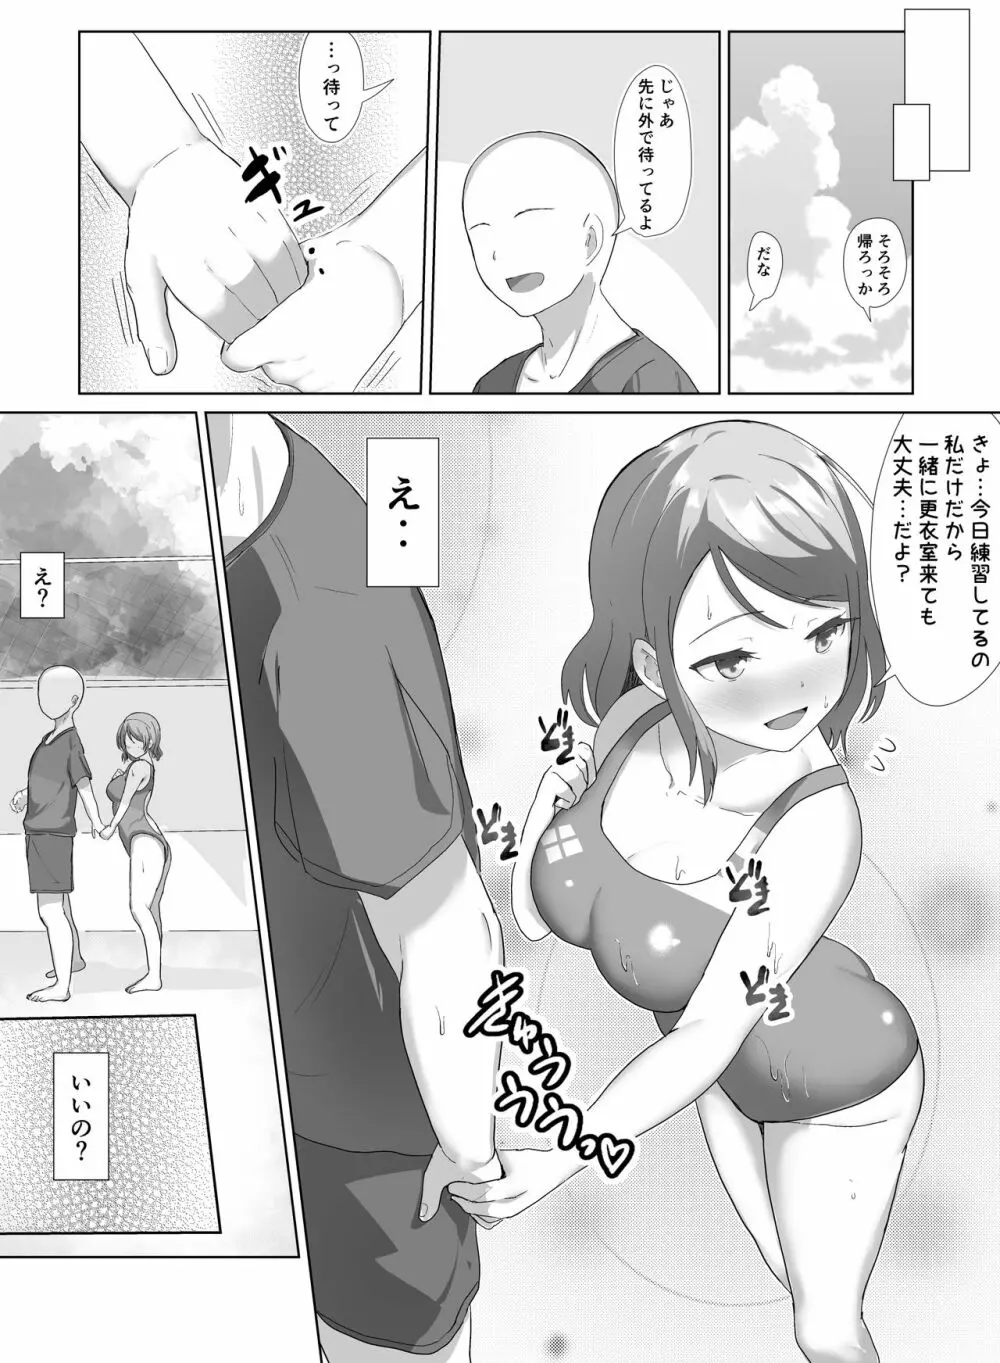 e-rn fanbox short love live doujinshi collection - page85